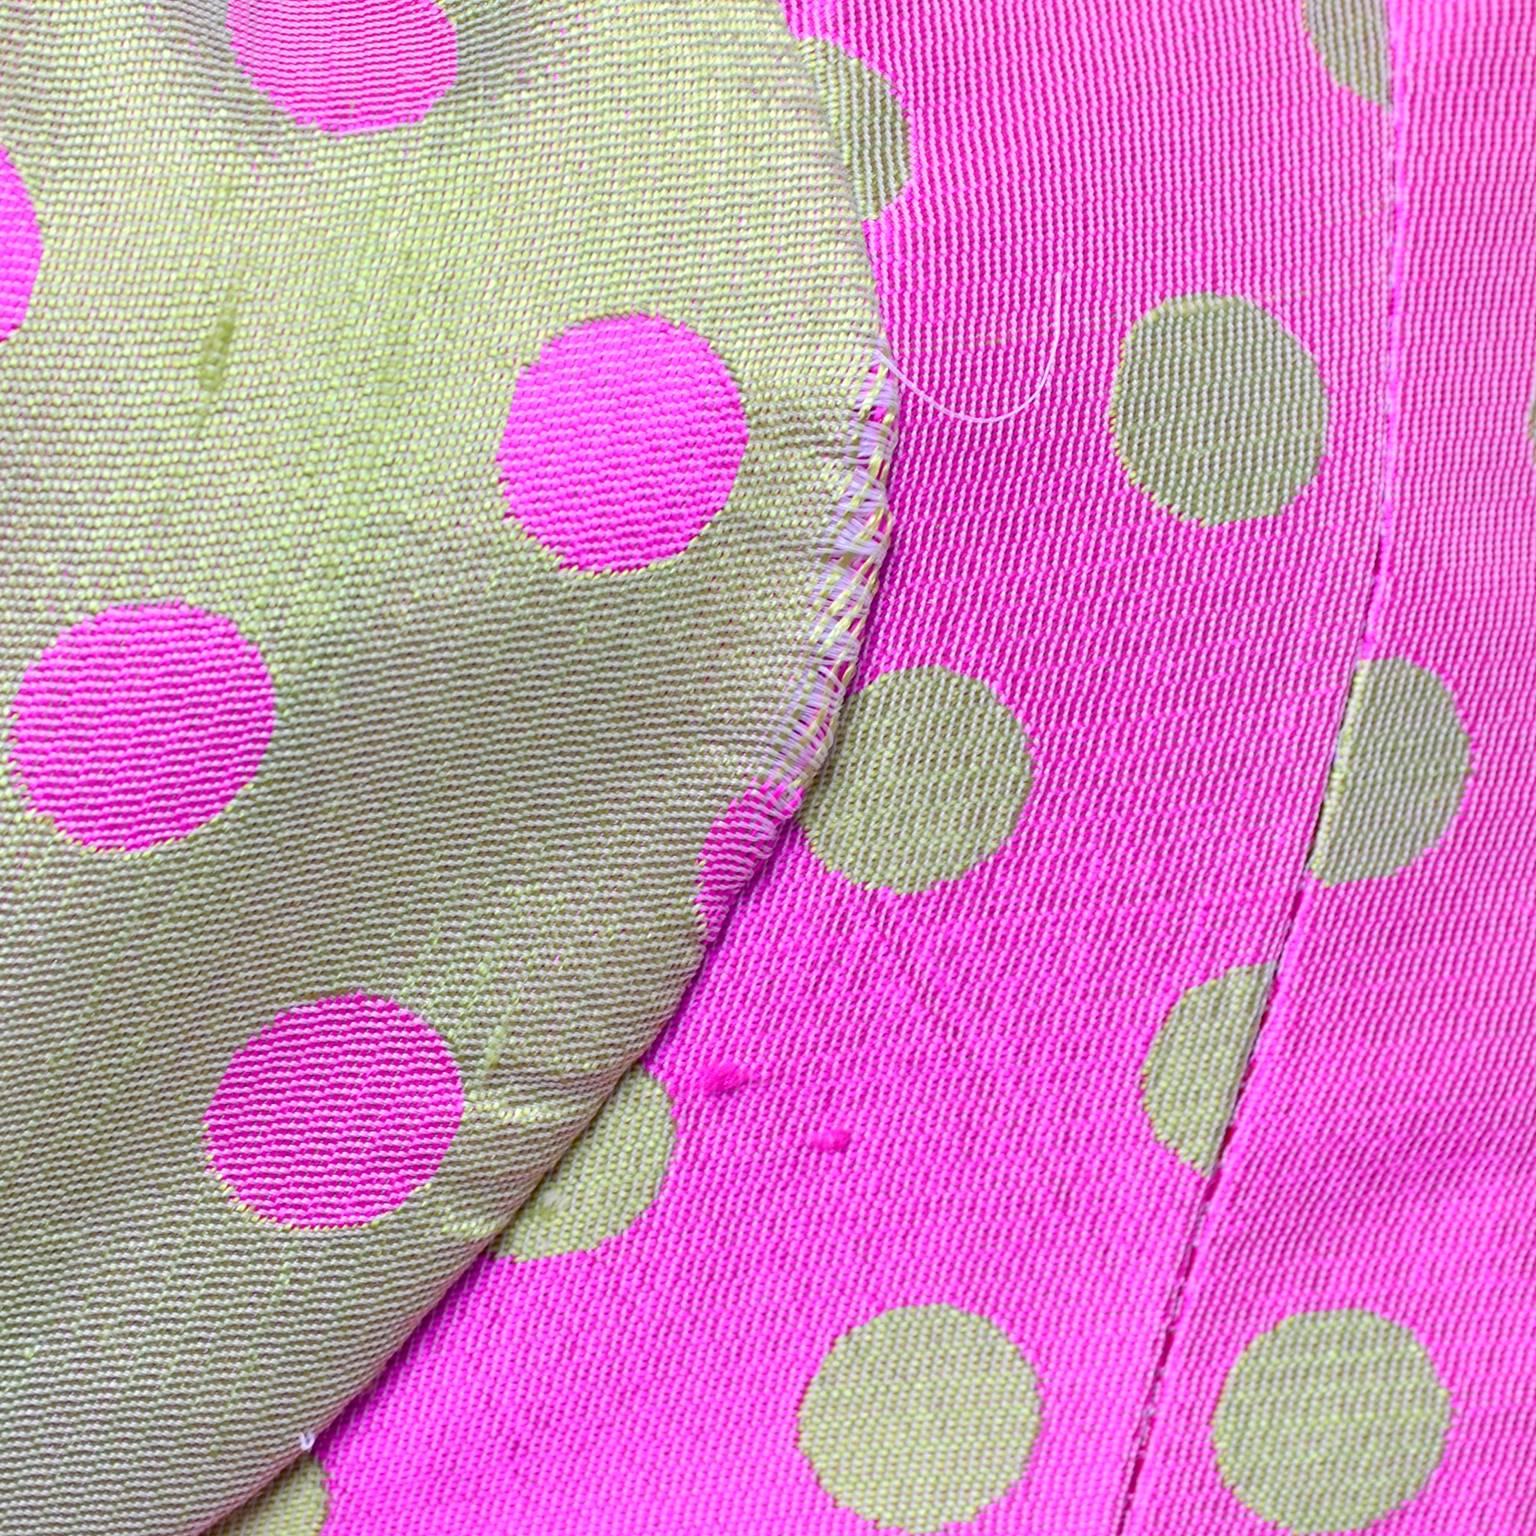 Christian Lacroix Pink and Green Polka Dot Dress With Peplum and Gathered Bust 7